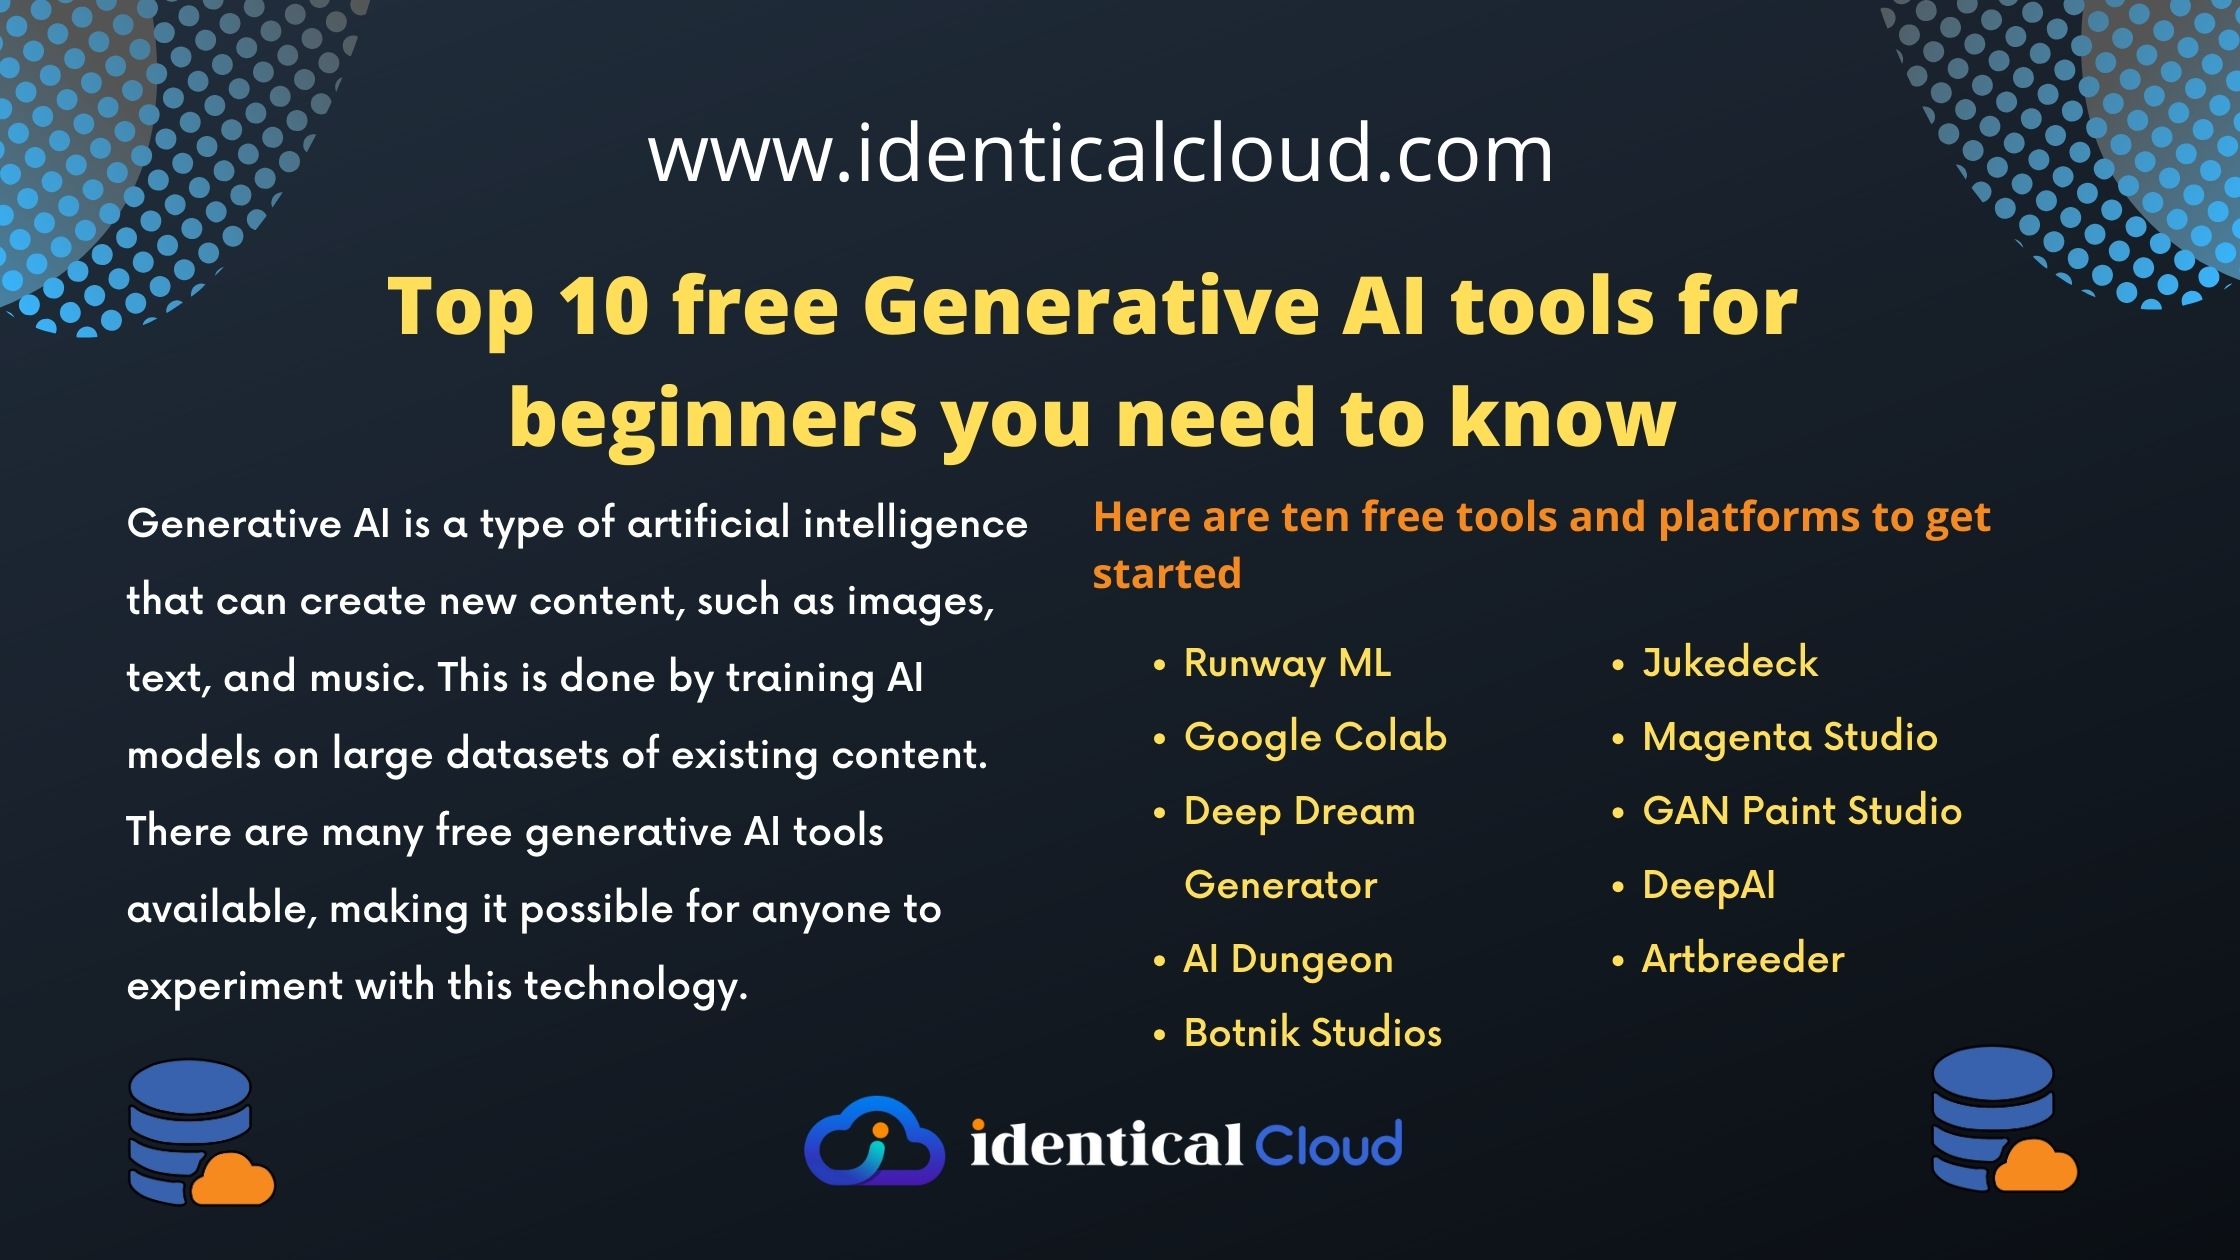 Top 10 free Generative AI tools for beginners you need to know - identicalcloud.com